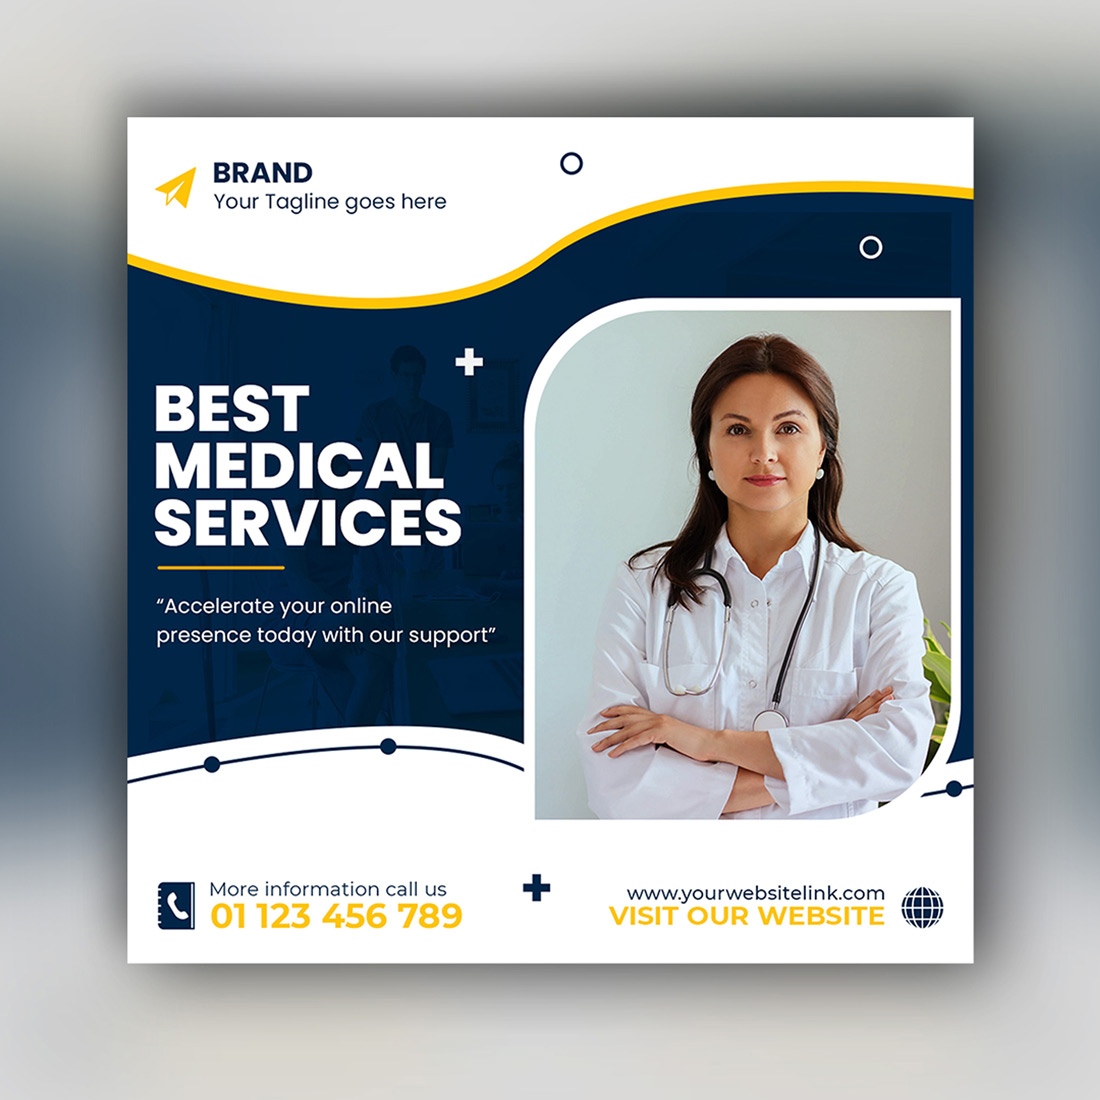 Flyer for a medical services company.